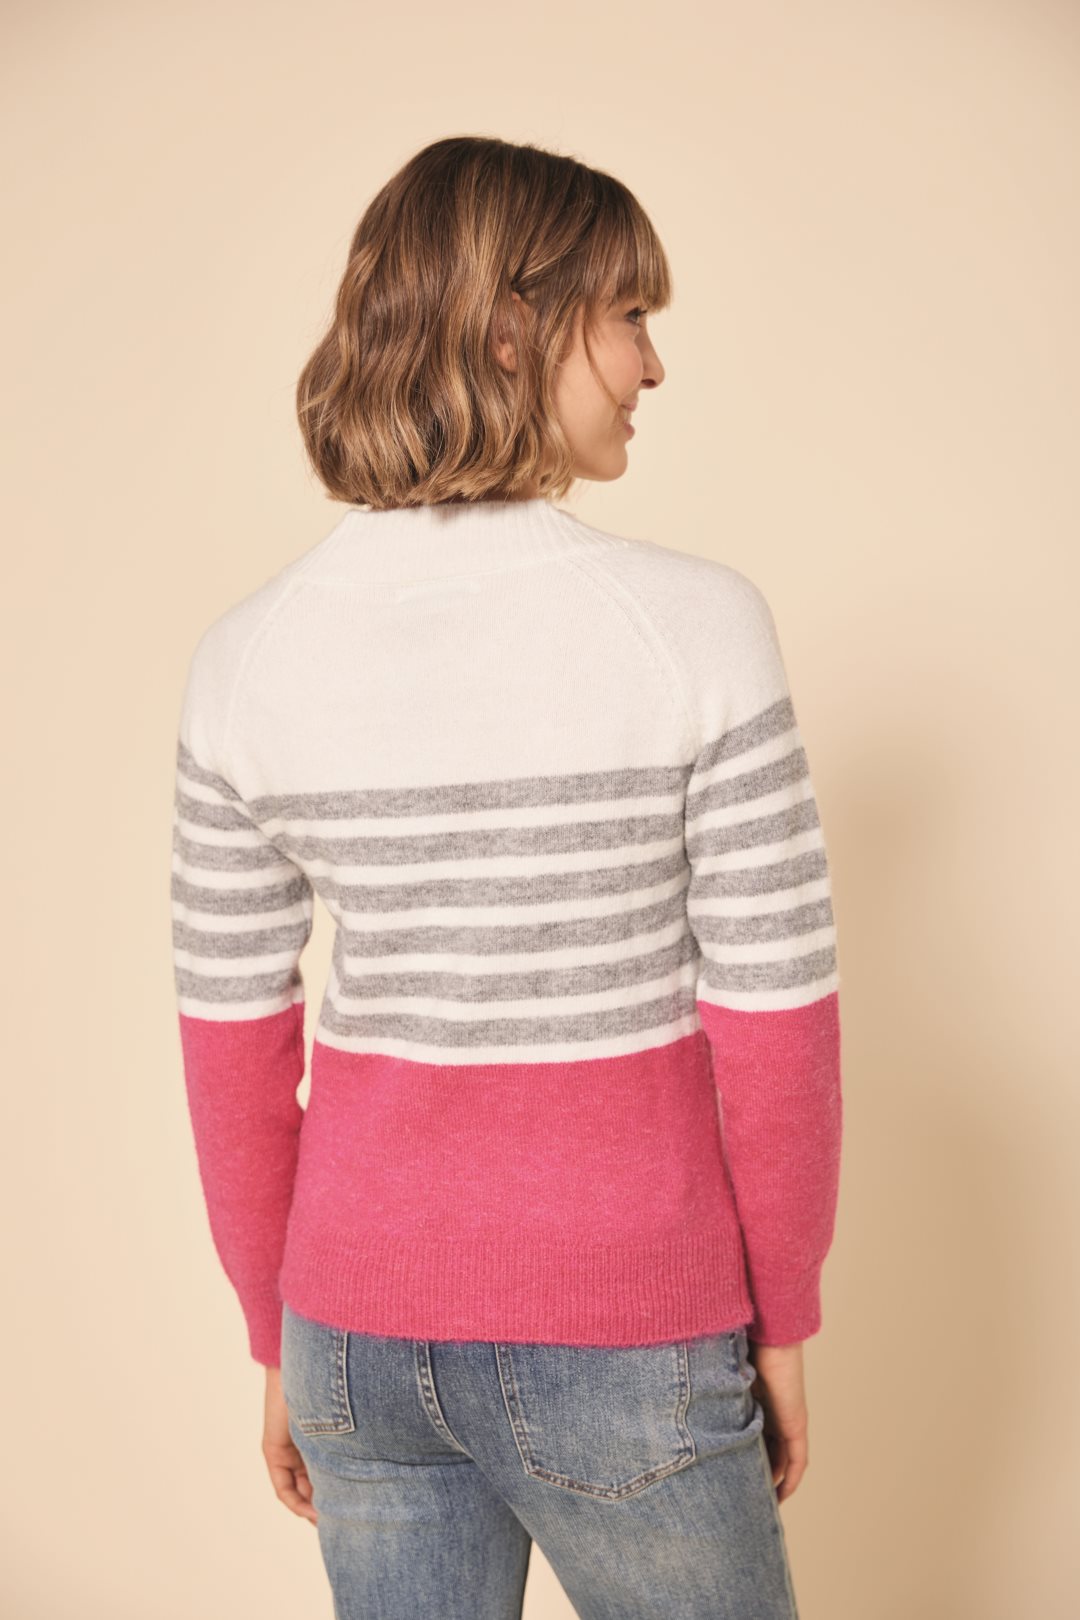 Giverny sweater